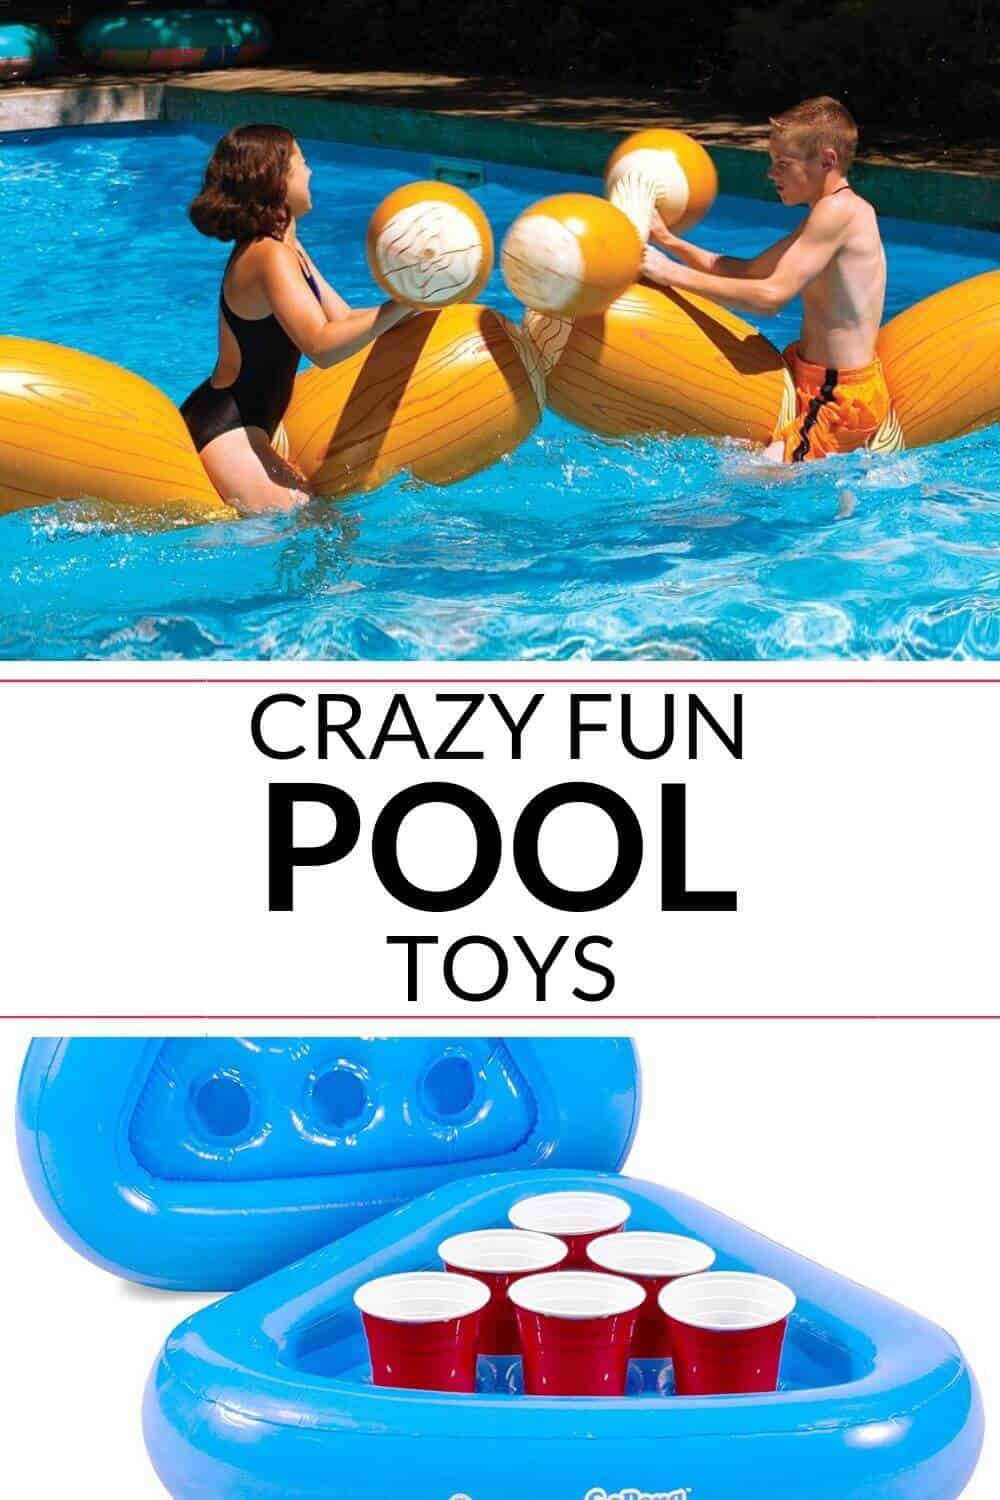 Collection of fun swimming pool toys